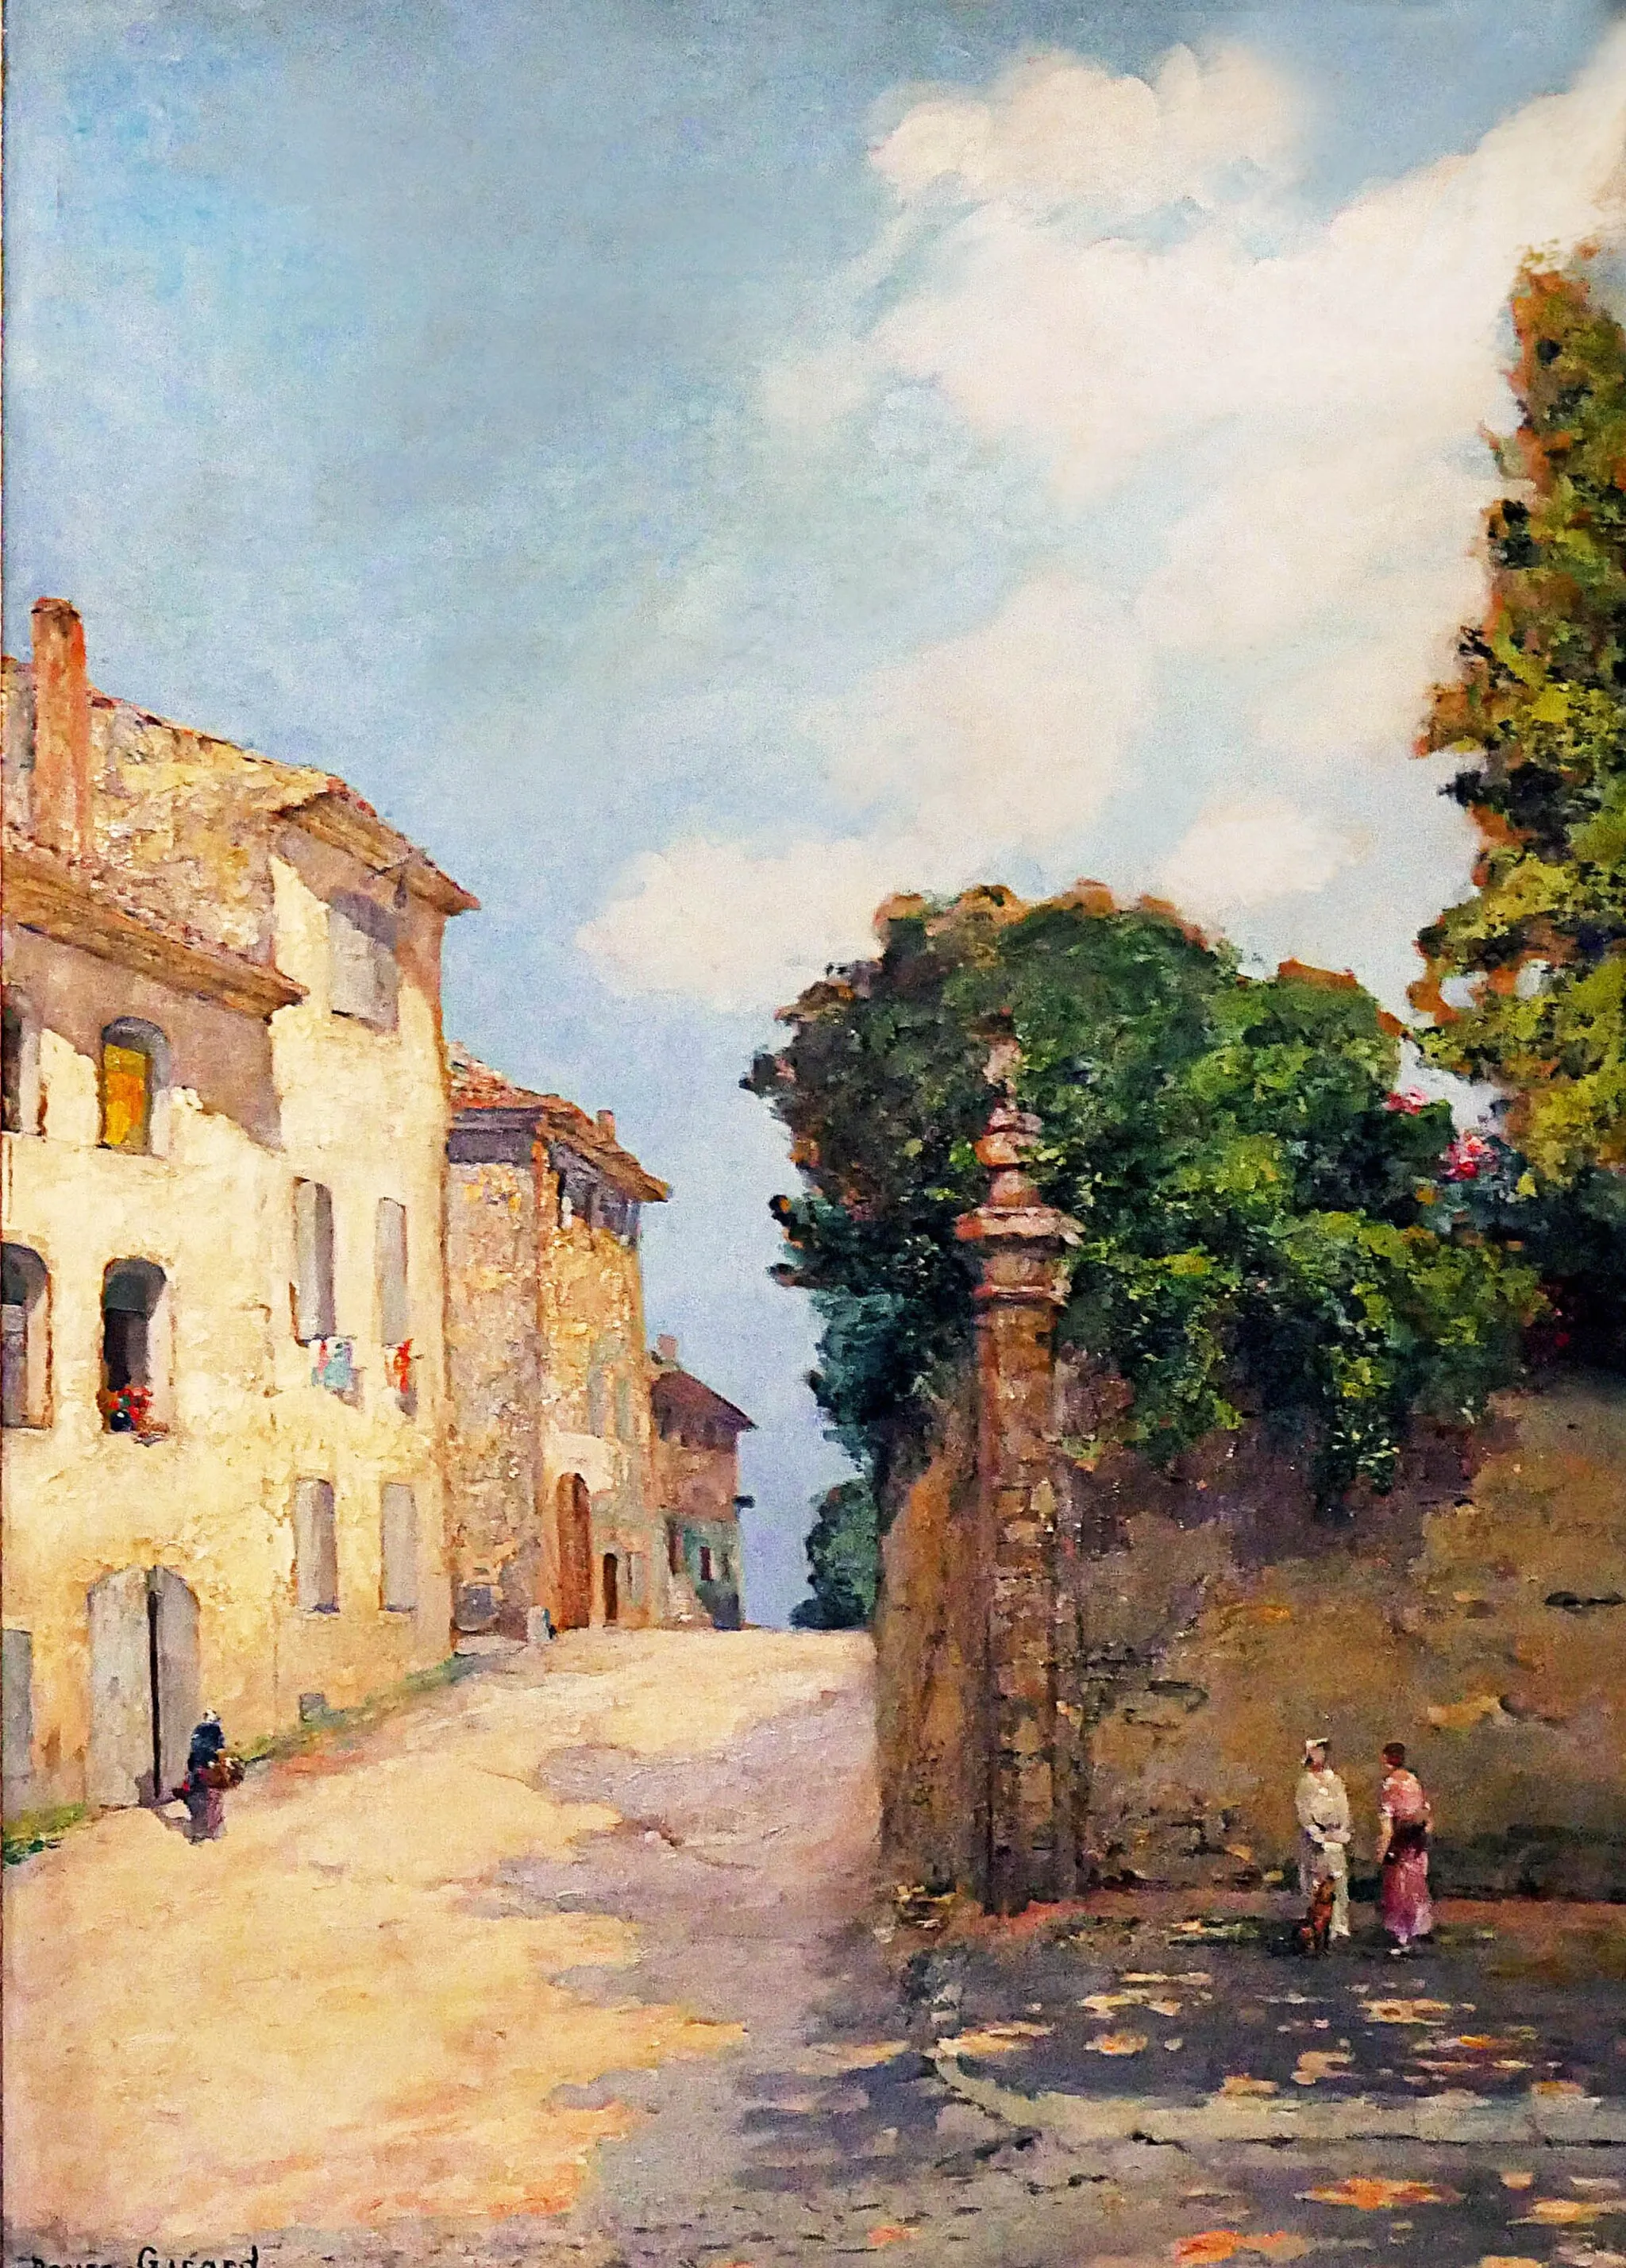 Photo showing: Oil painting on wood by Désiré Girard representing the boulevard Lamartine in Salon-de-Provence